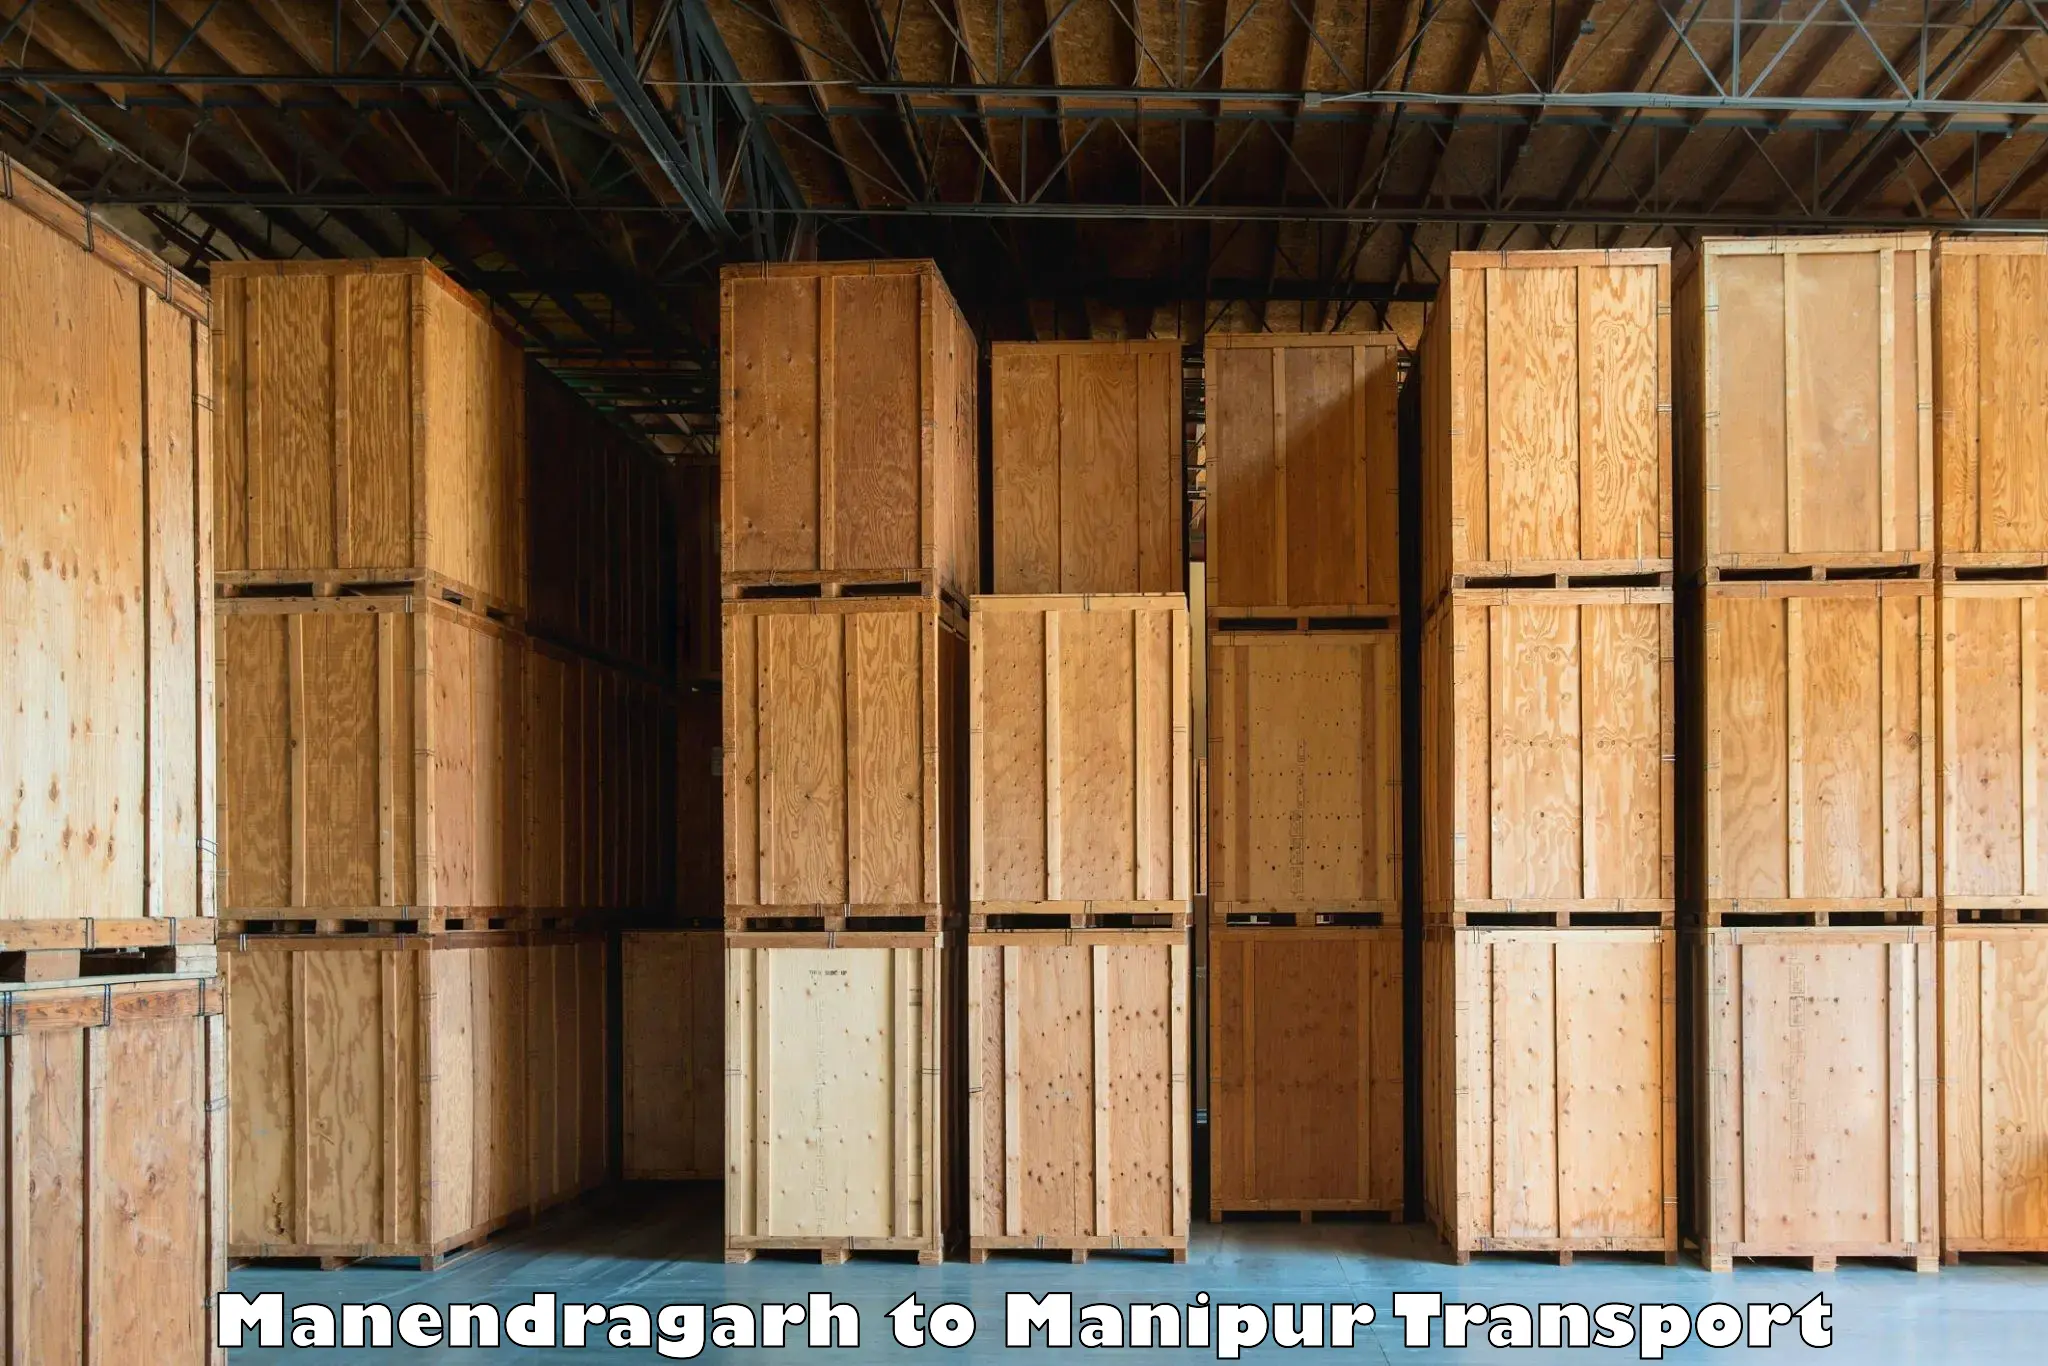 Container transport service Manendragarh to Thoubal